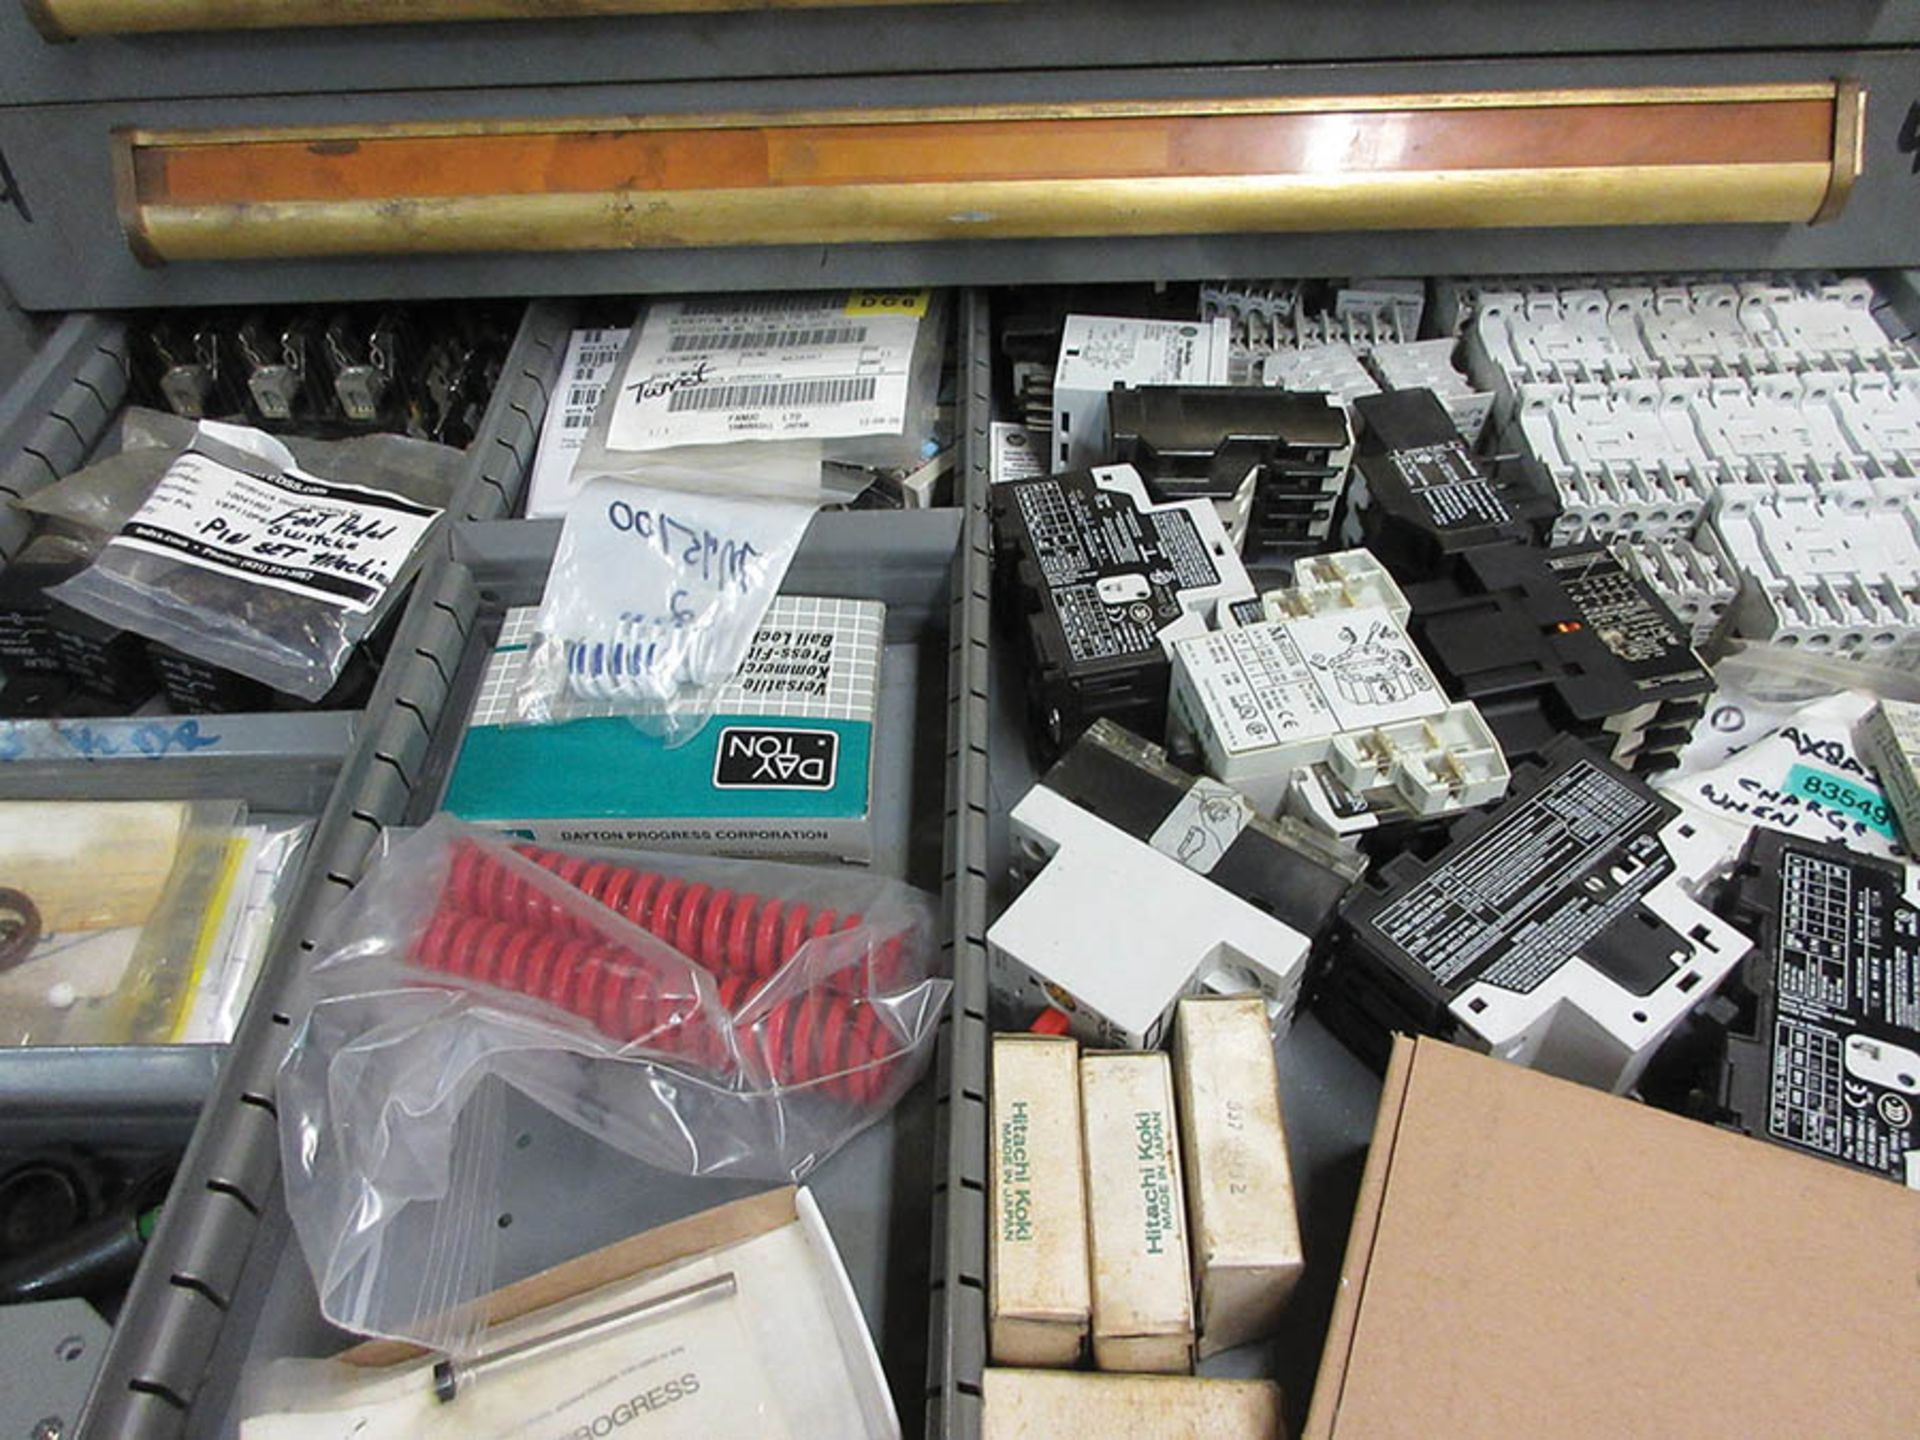 EQUIPTO 13-DRAWER CABINET W/ CONTENTS OF RELAYS, SWITCHES, CONNECTORS, AIR FITTINGS & MORE - Image 3 of 5